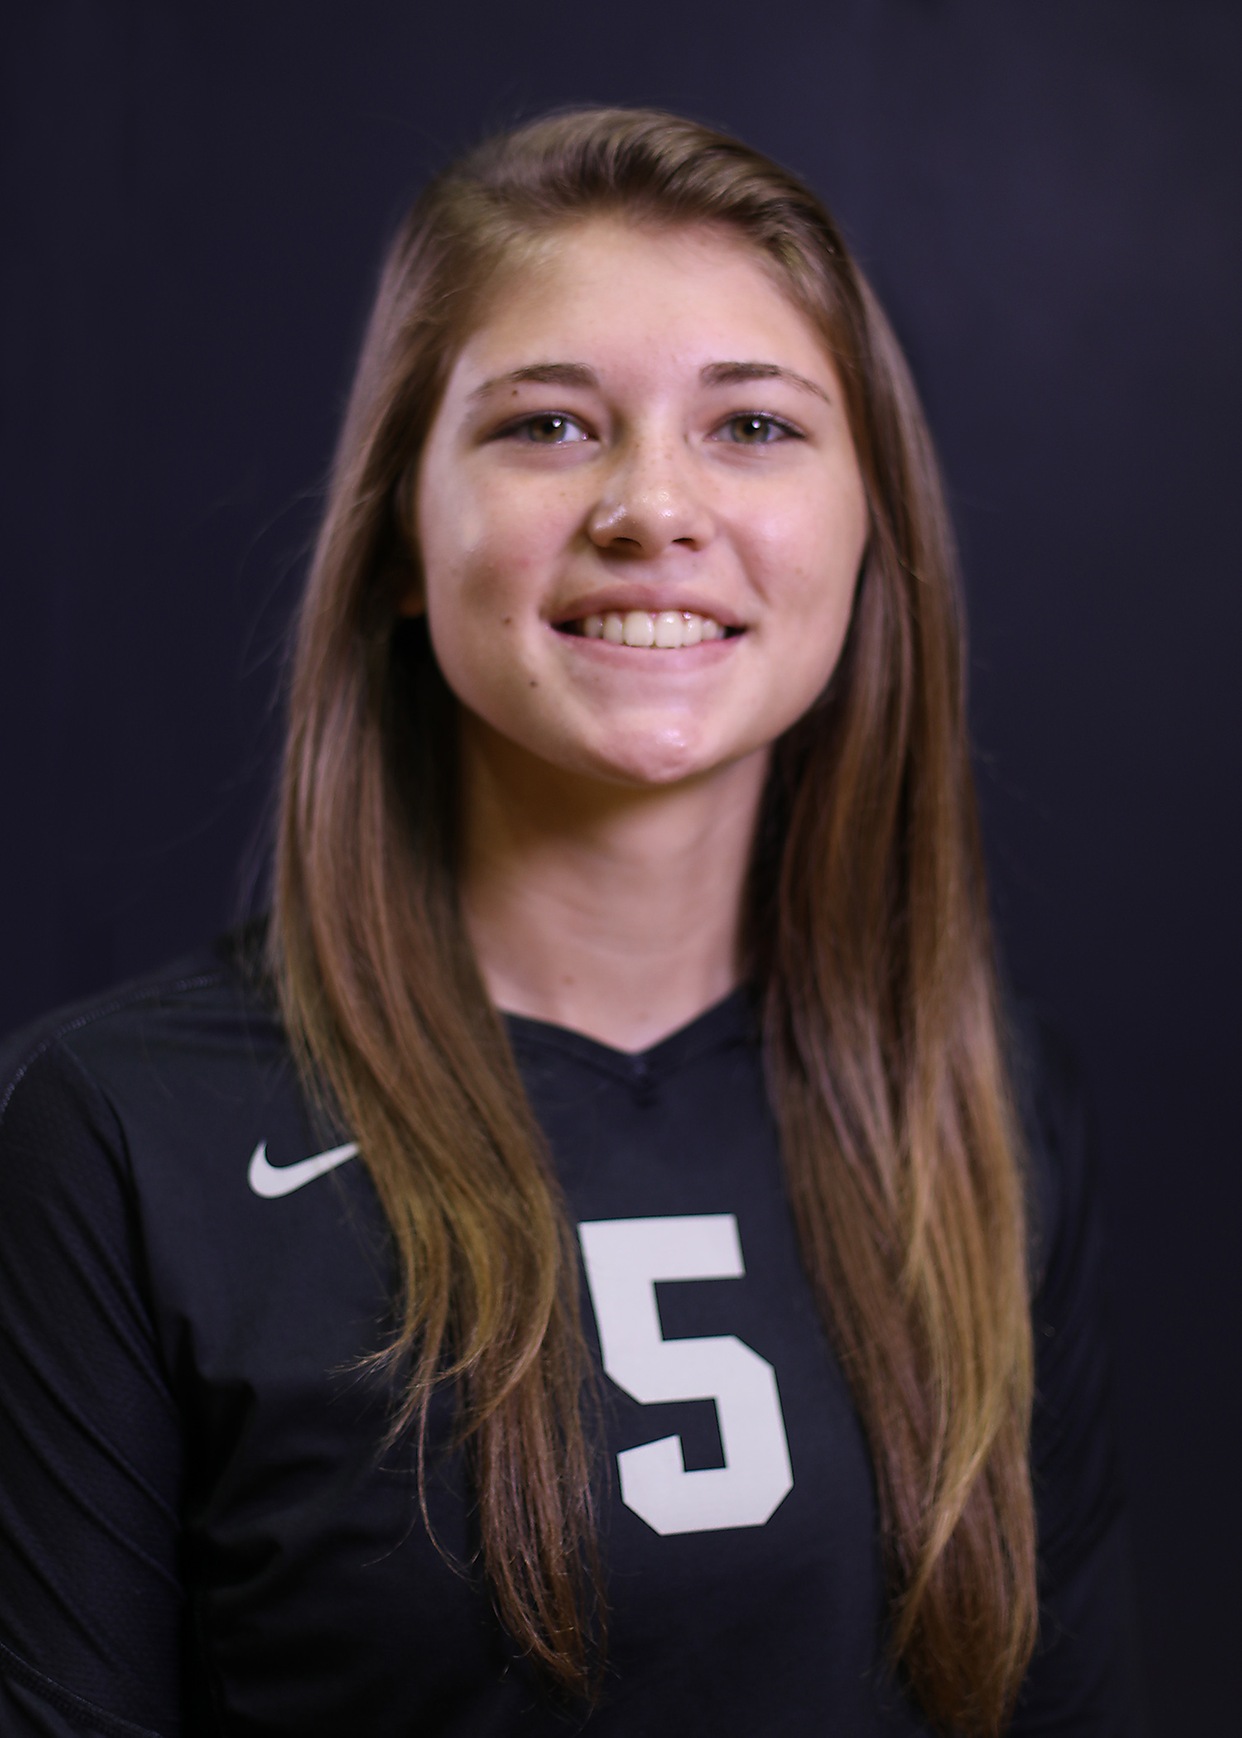 Columbus State Community College Volleyball Player Bobby Diamond
Photo: Columbus State Community College